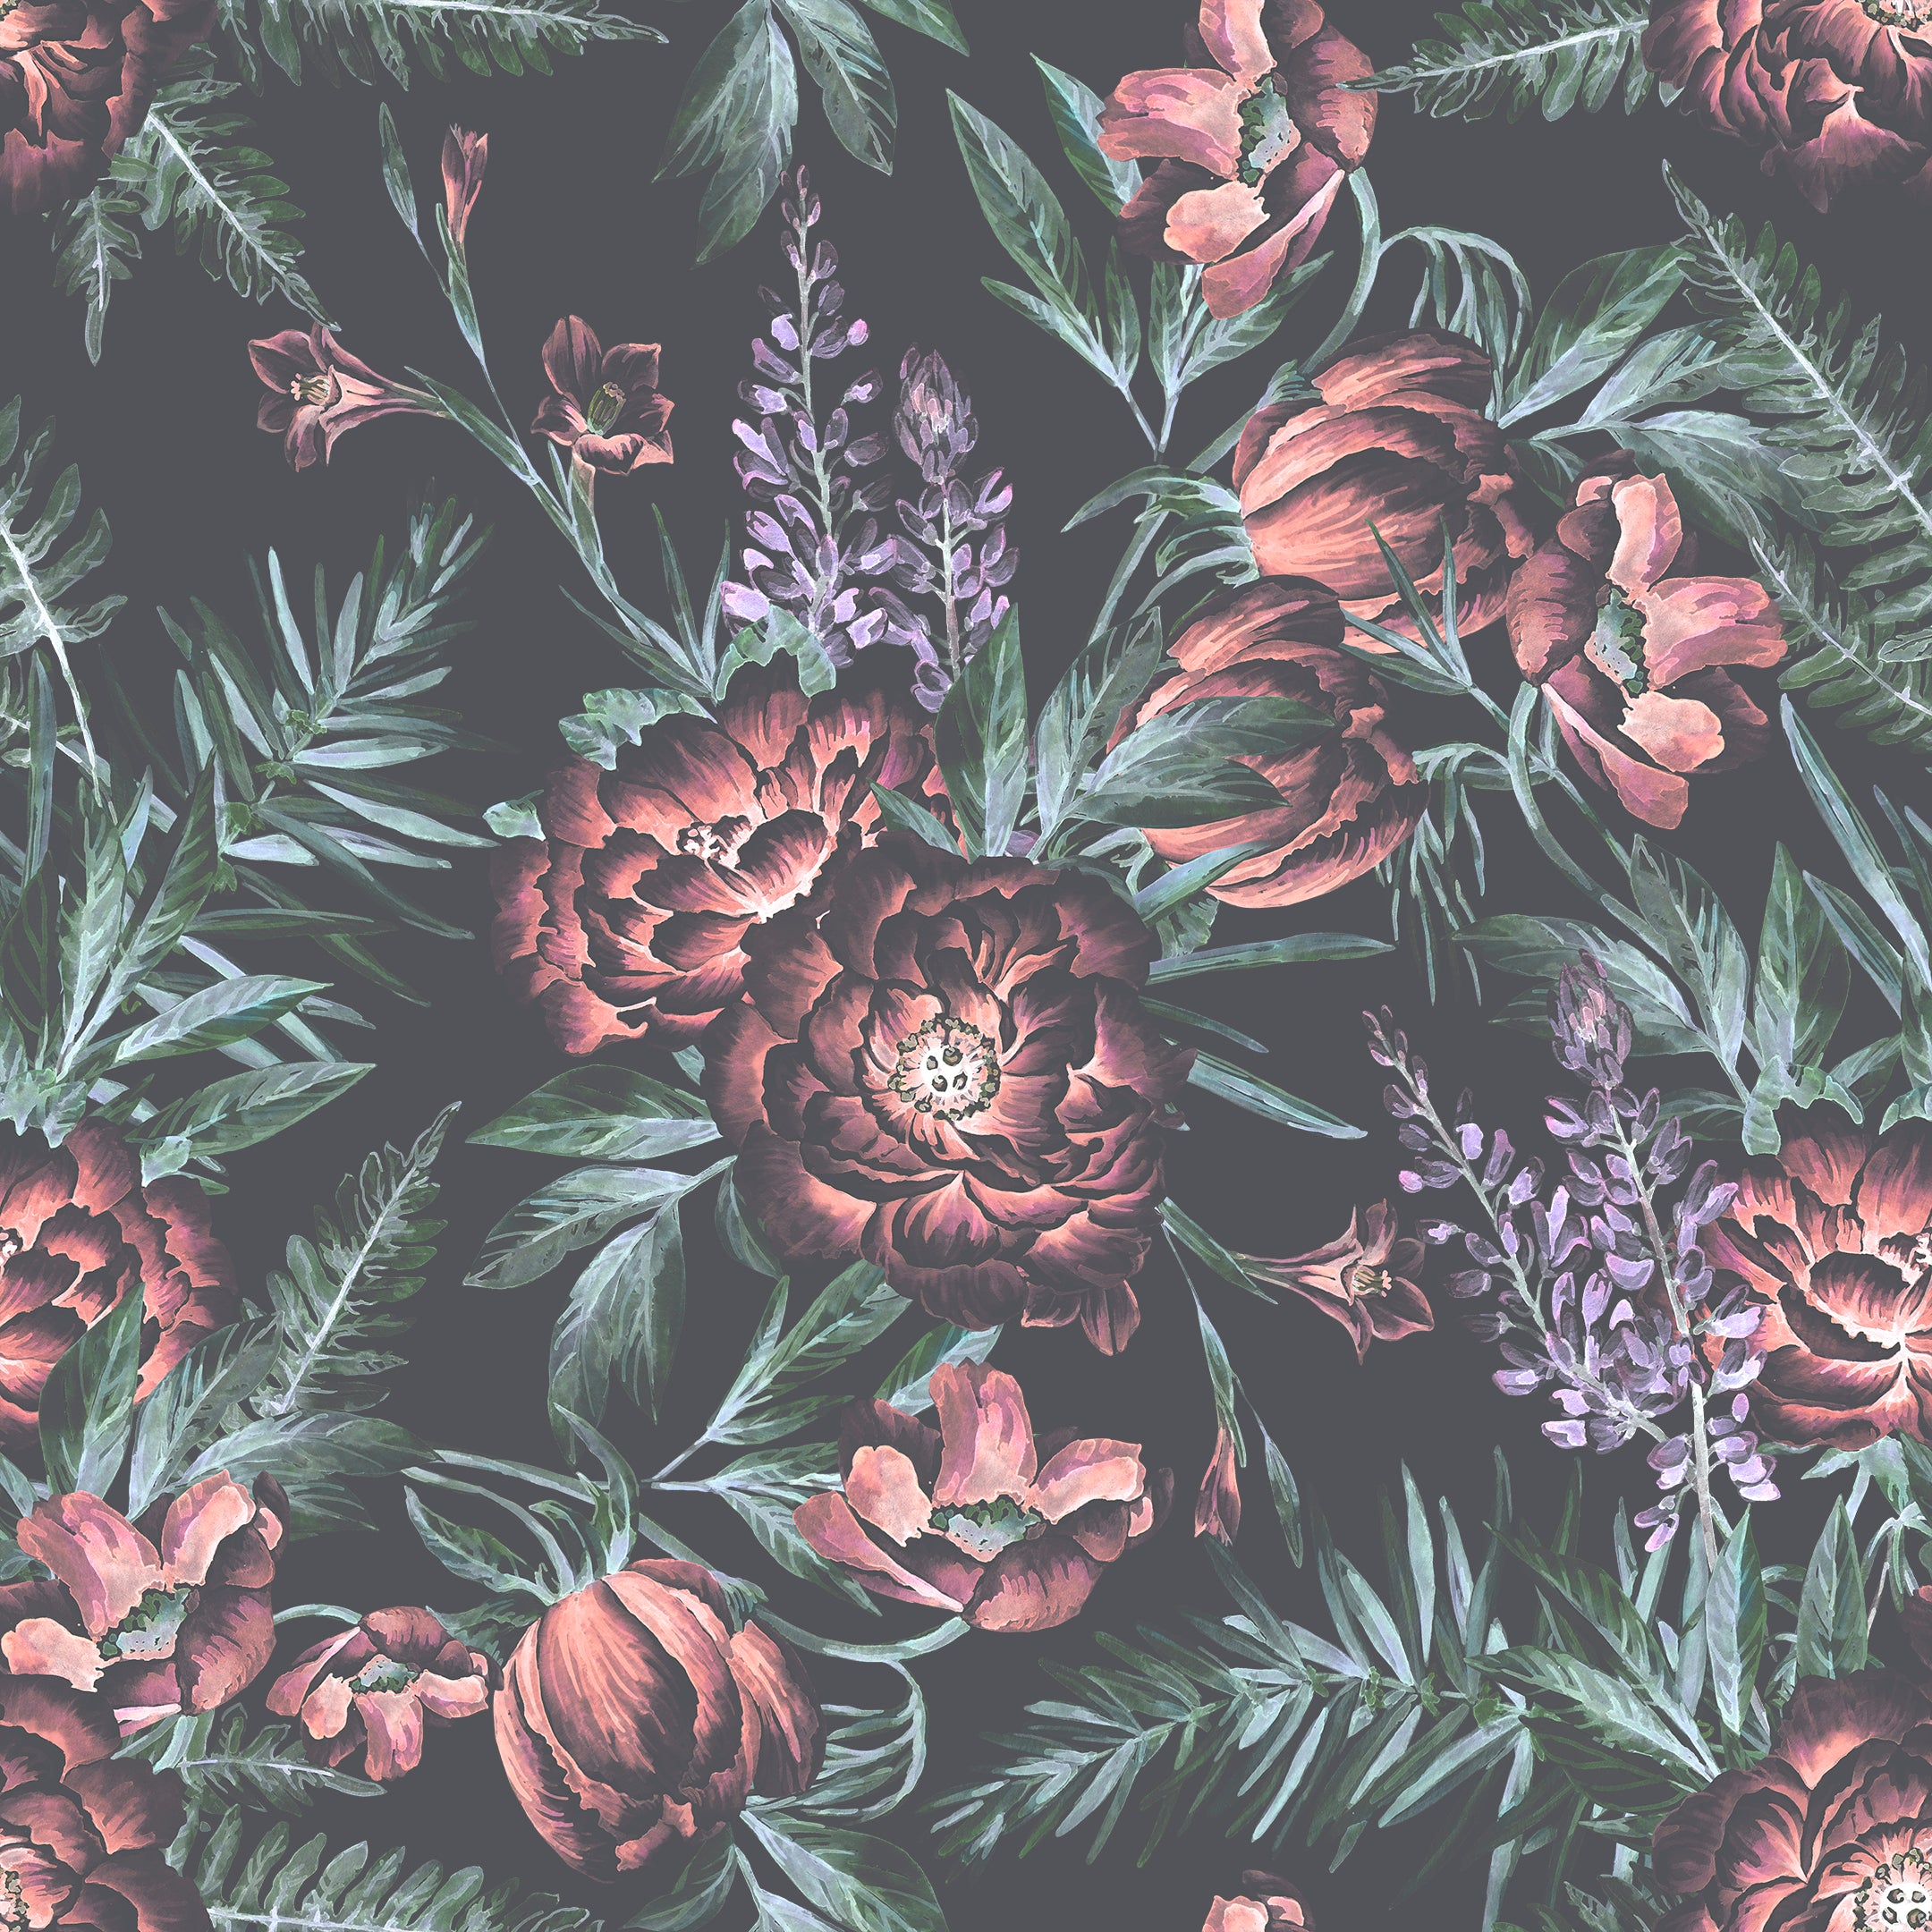 A detailed close-up of the Ephemeral Wallpaper, featuring vibrant illustrations of large red and pink flowers, green leaves, and purple accents on a dark background.